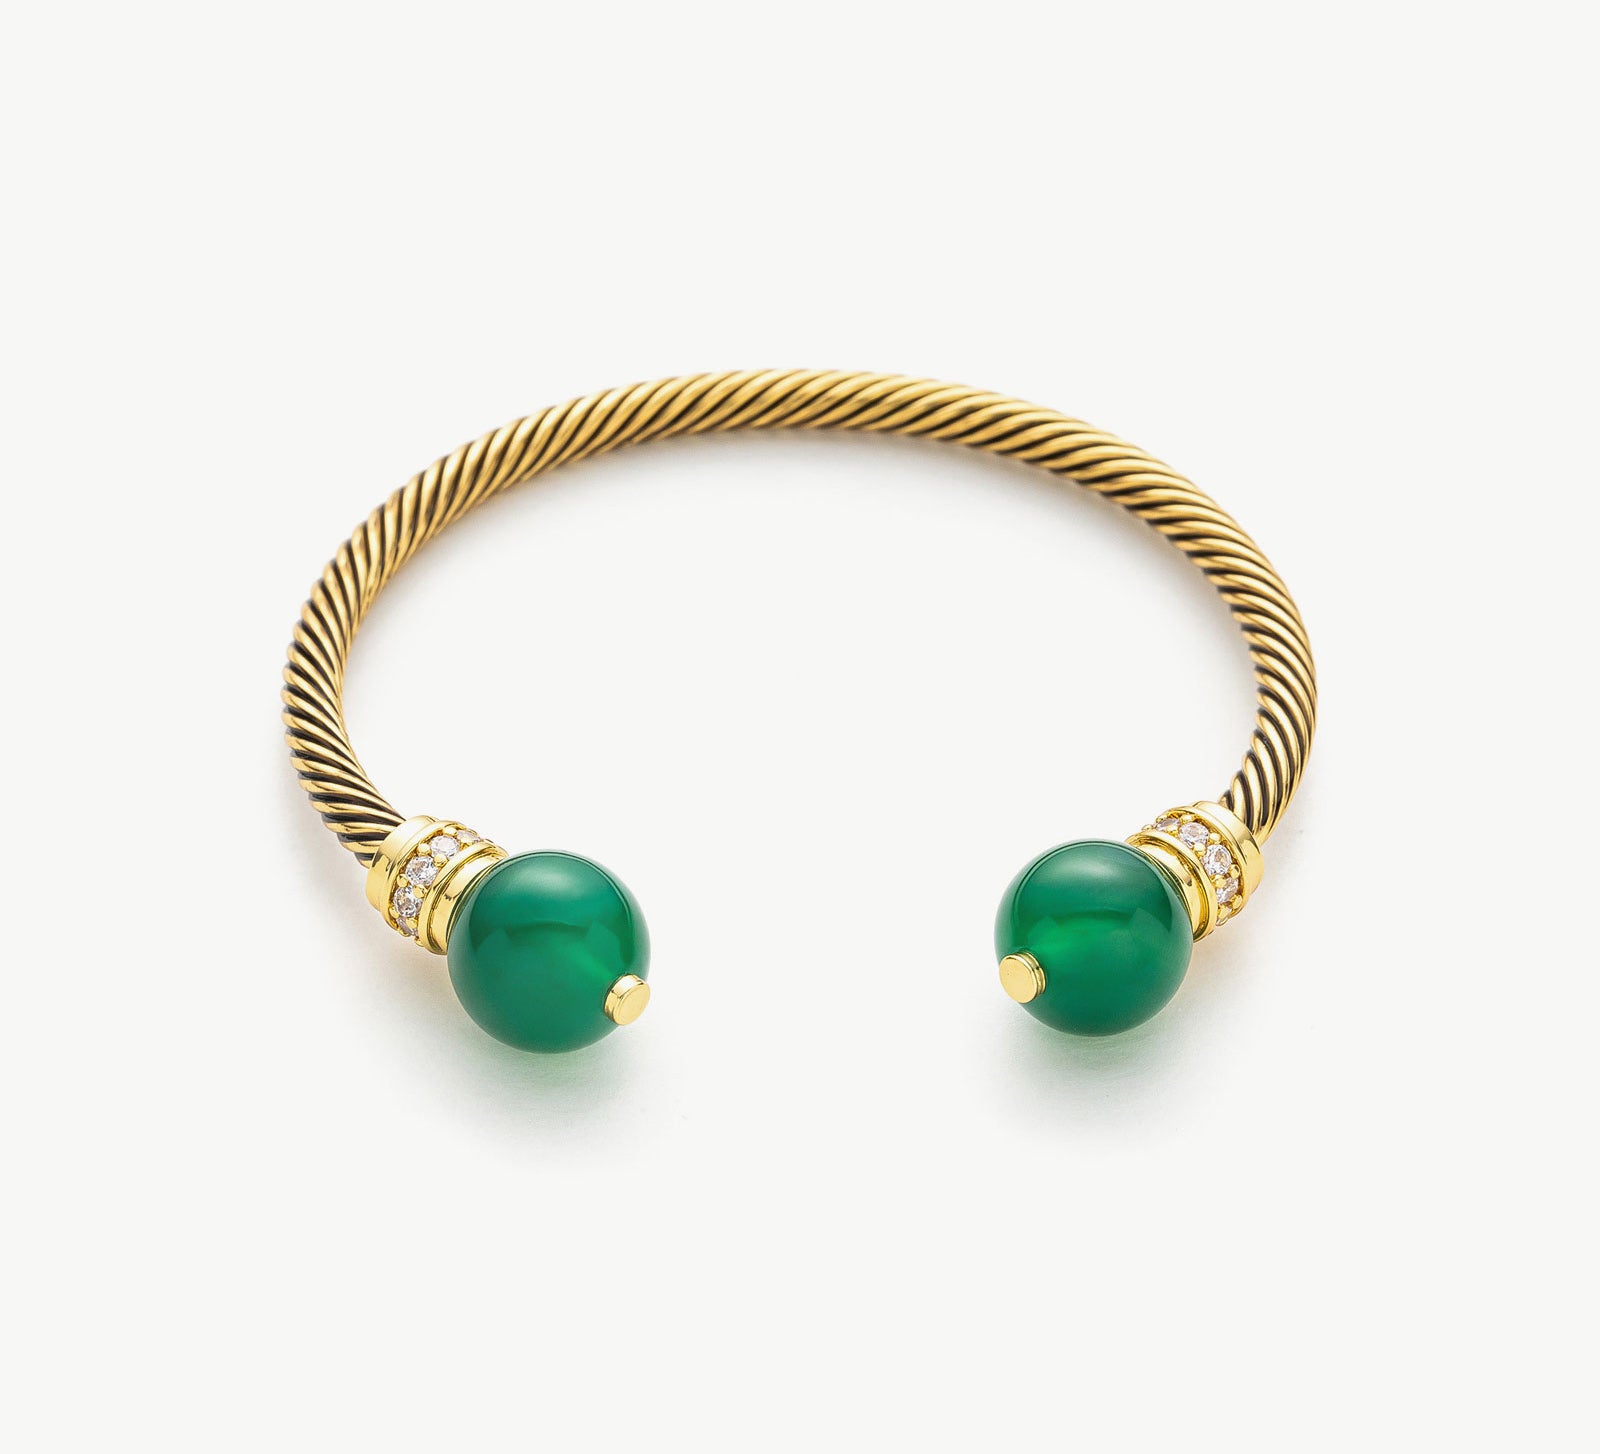 Agate Bracelet in Gold with Green Gemstones, exuding timeless elegance with a vintage-inspired design, this bracelet features luscious green agate gemstones set in a delicate gold setting for a luxurious and refined accessory